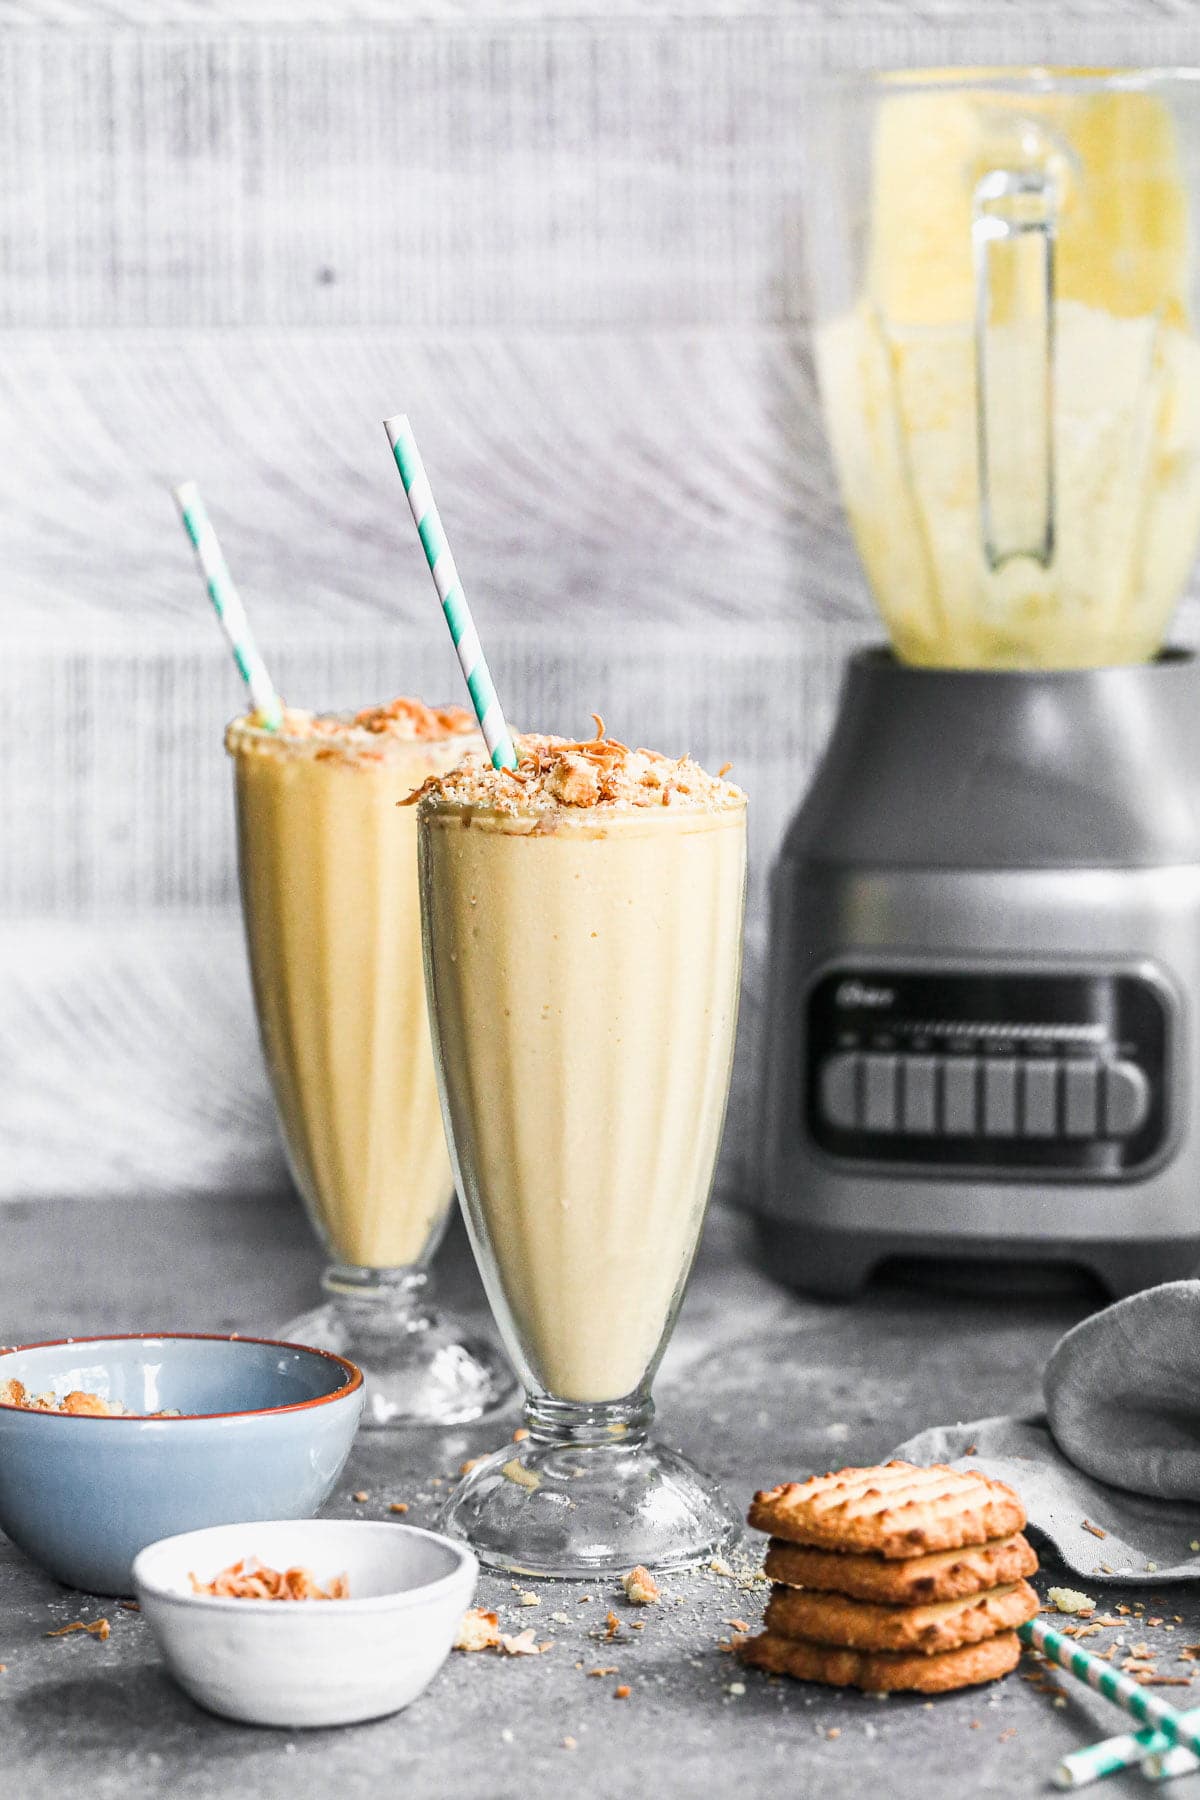 We're celebrating Oster's 75th Blending Anniversary with a Tropical Smoothie worthy of any special occasion. Filled with all your favorite tropical flavors - pineapple, mango, and coconut - this easy-to-throw-together smoothie turned dessert is irresistibly sweet, brimming with beach vibes and here to party. We top each ultra smooth, cold smoothie with toasted coconut and crushed shortbread cookies for the perfect play on texture. Don't miss this one! 